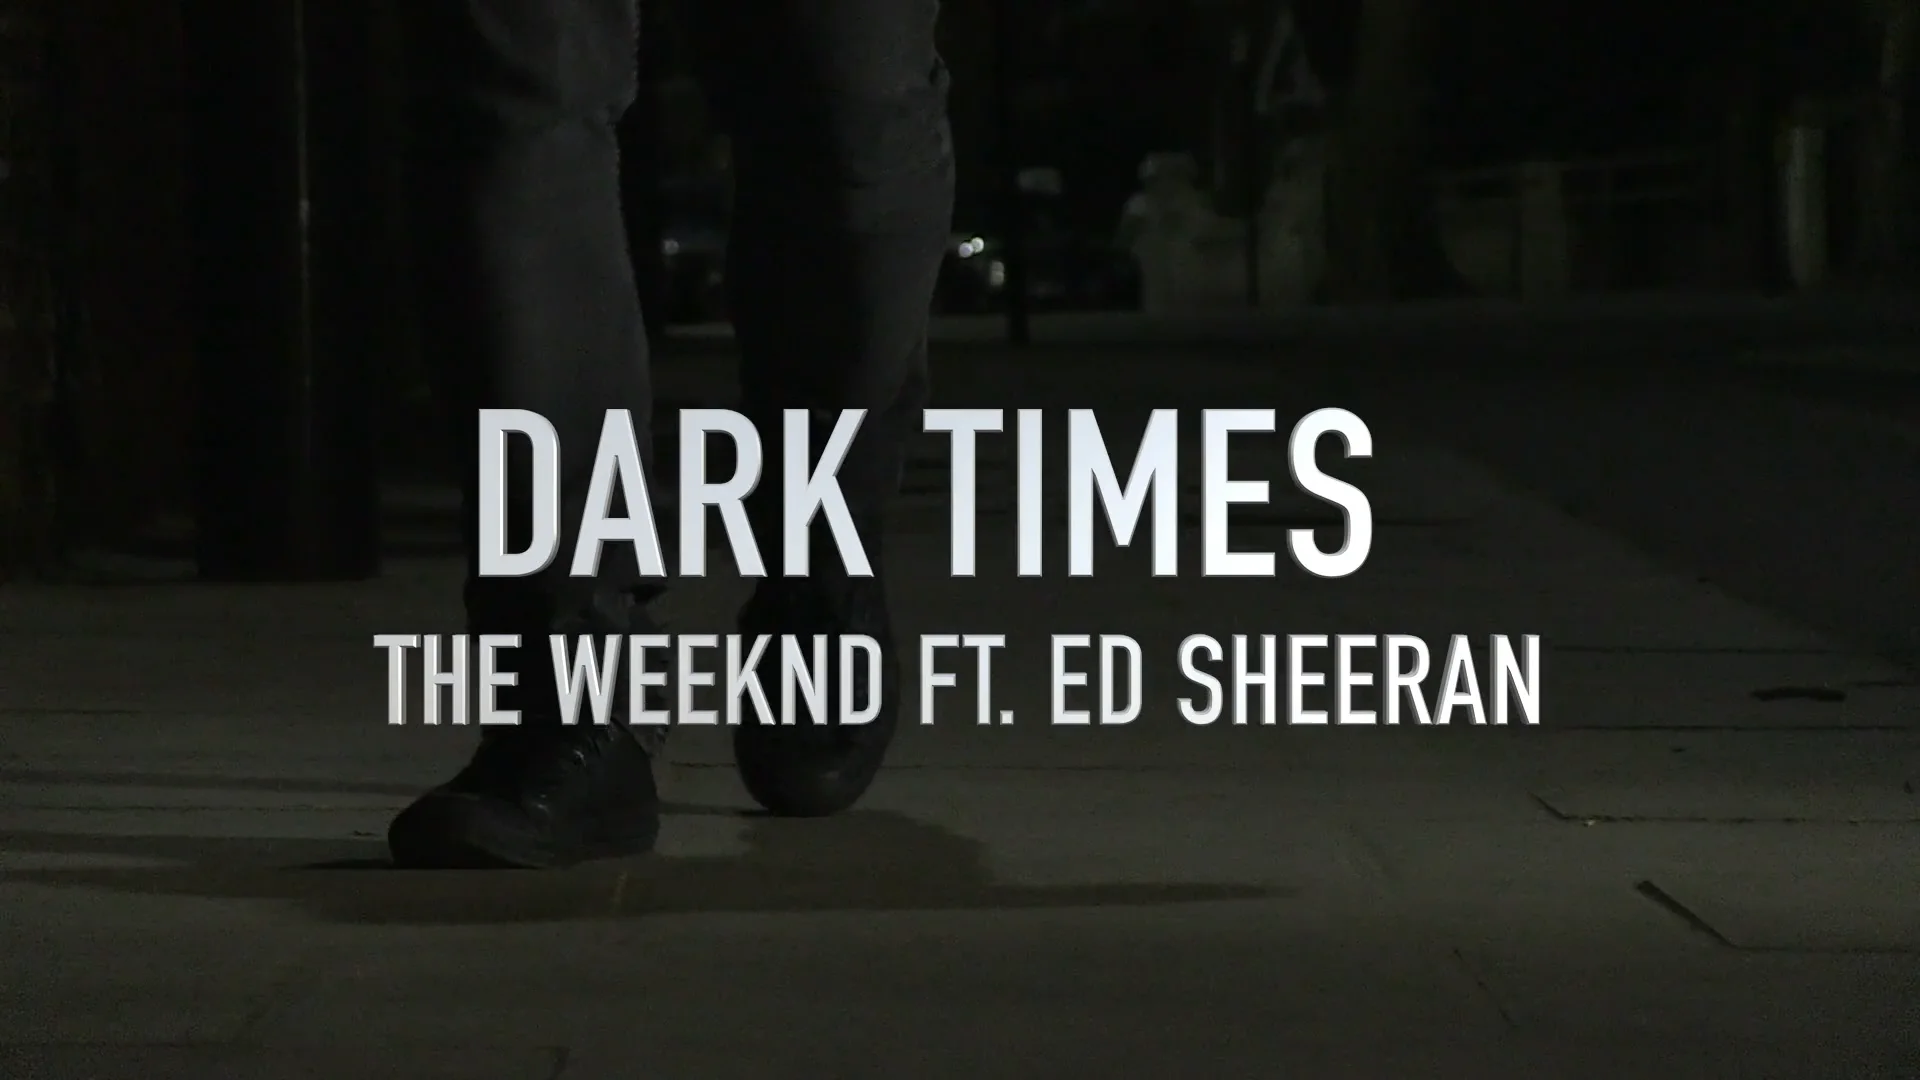 Dark Times' (The Weeknd ft. Ed Sheeran) Unofficial Music Video on Vimeo